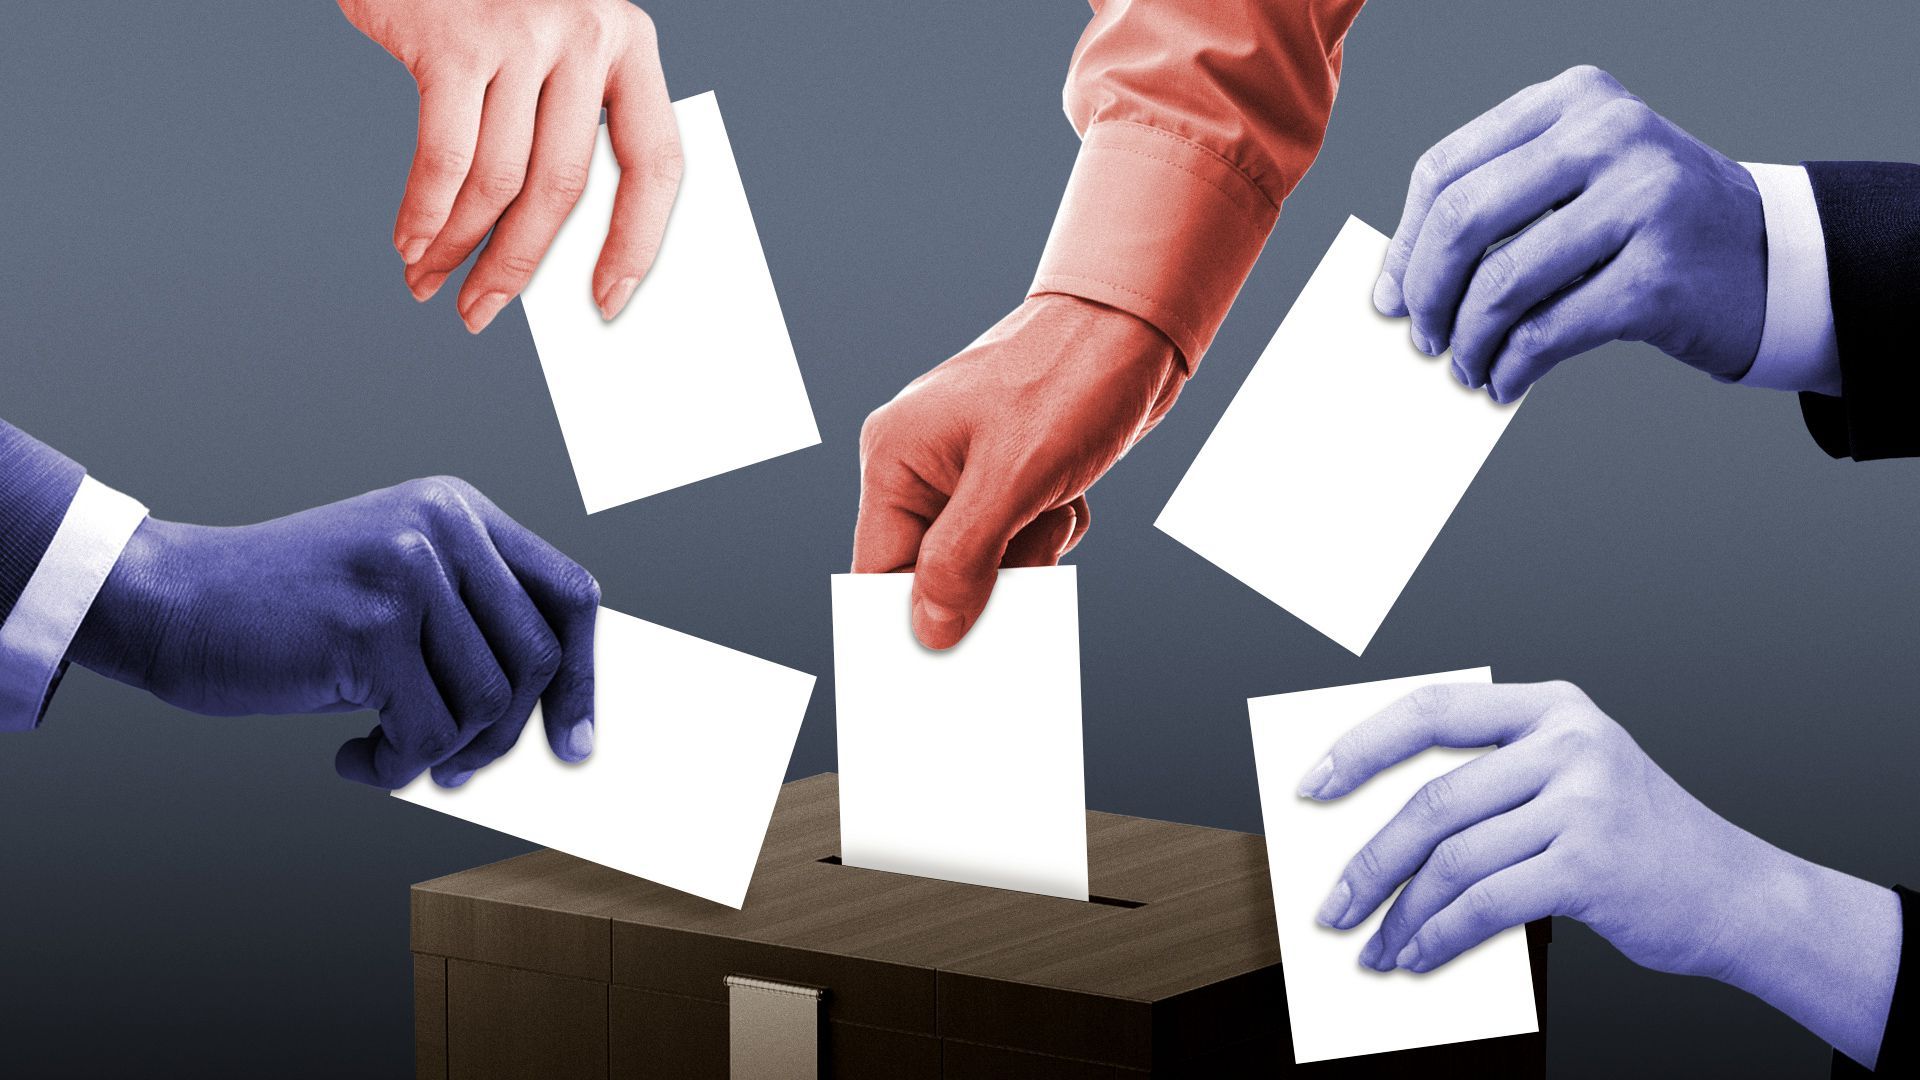 Illustration of members of Congress placing ballots in a box.